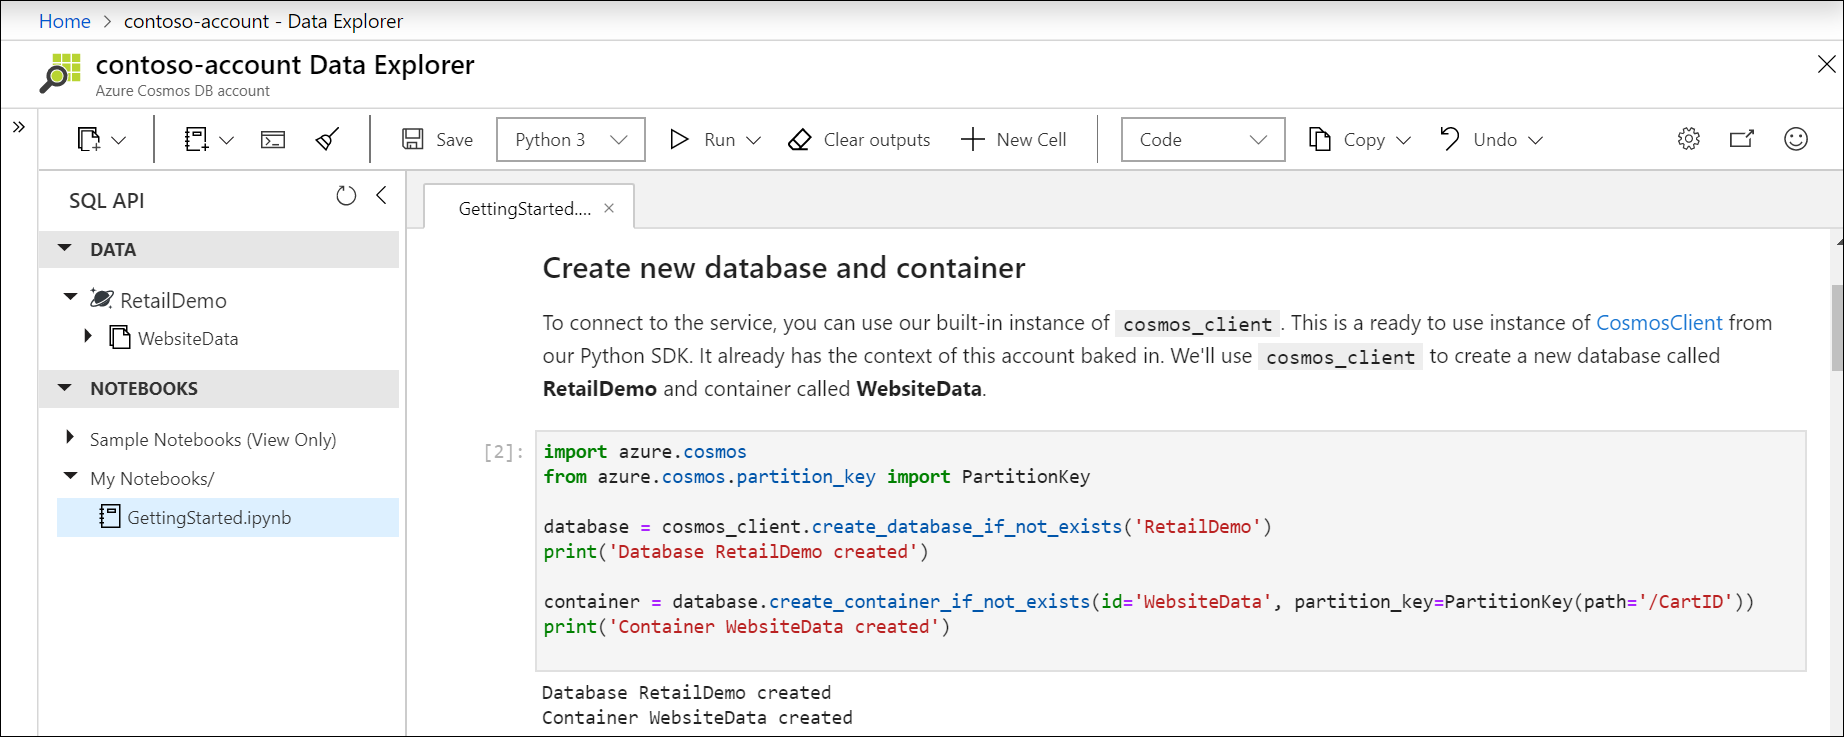 Create new database and container with built-in Python SDK in notebook.